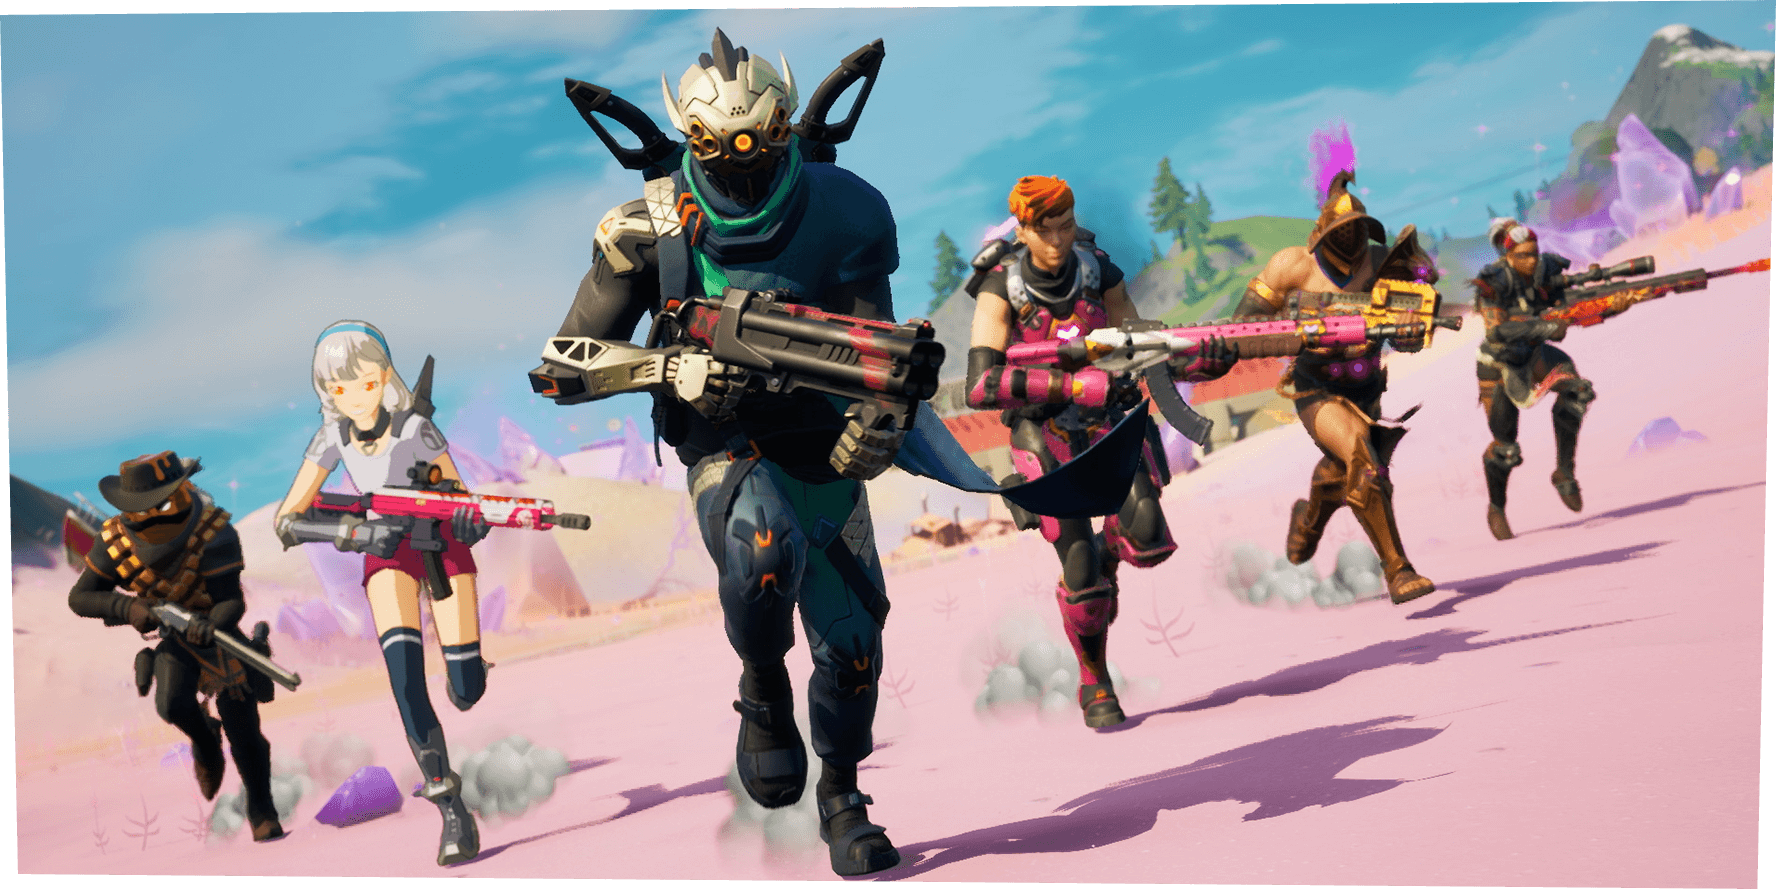 New weapons added to Fortnite Season 5